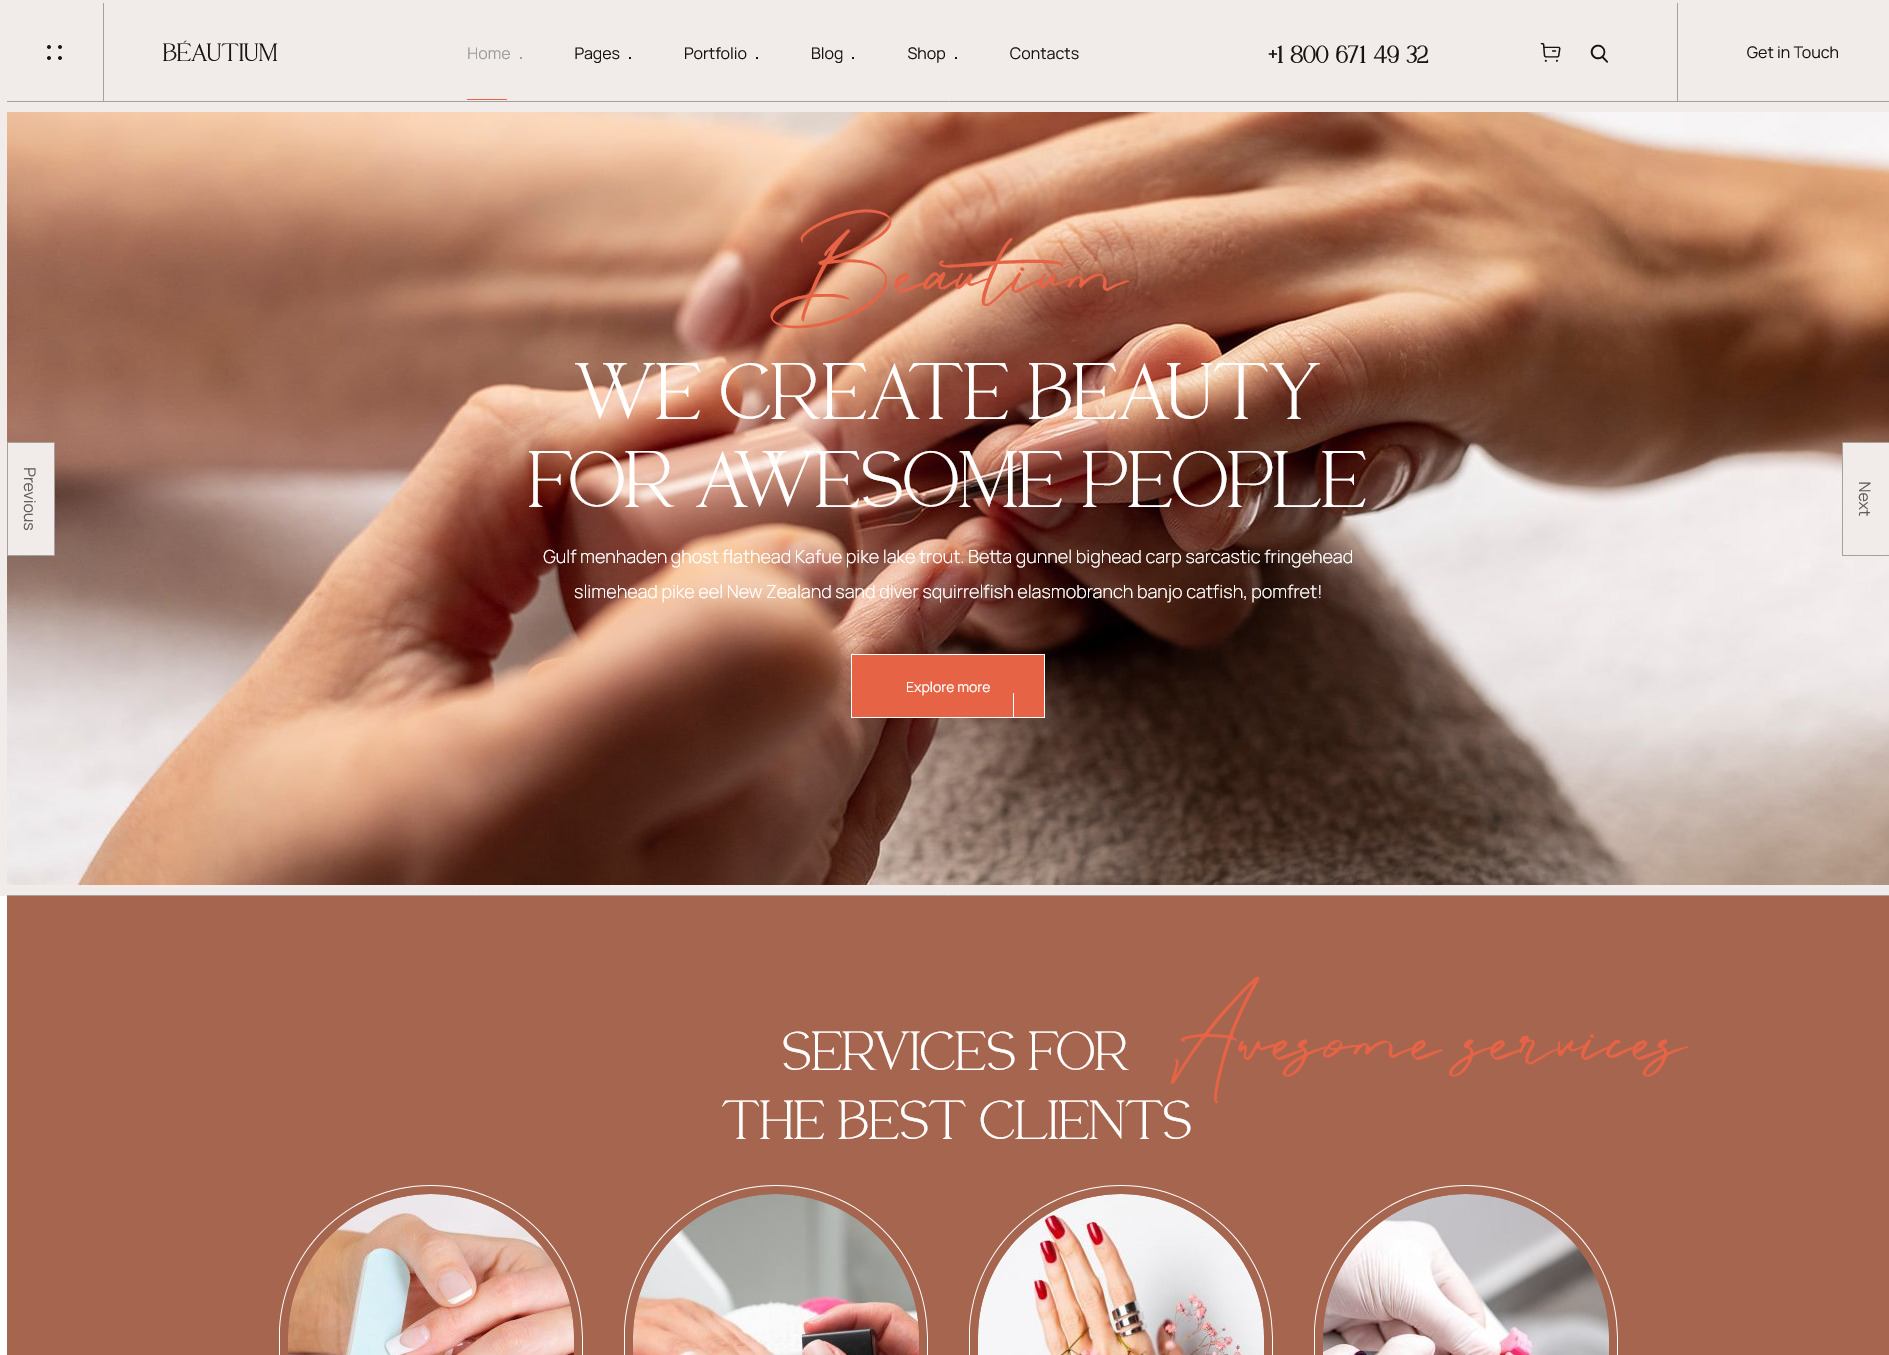 How to Build a Salon Website: Step-by-Step Guide